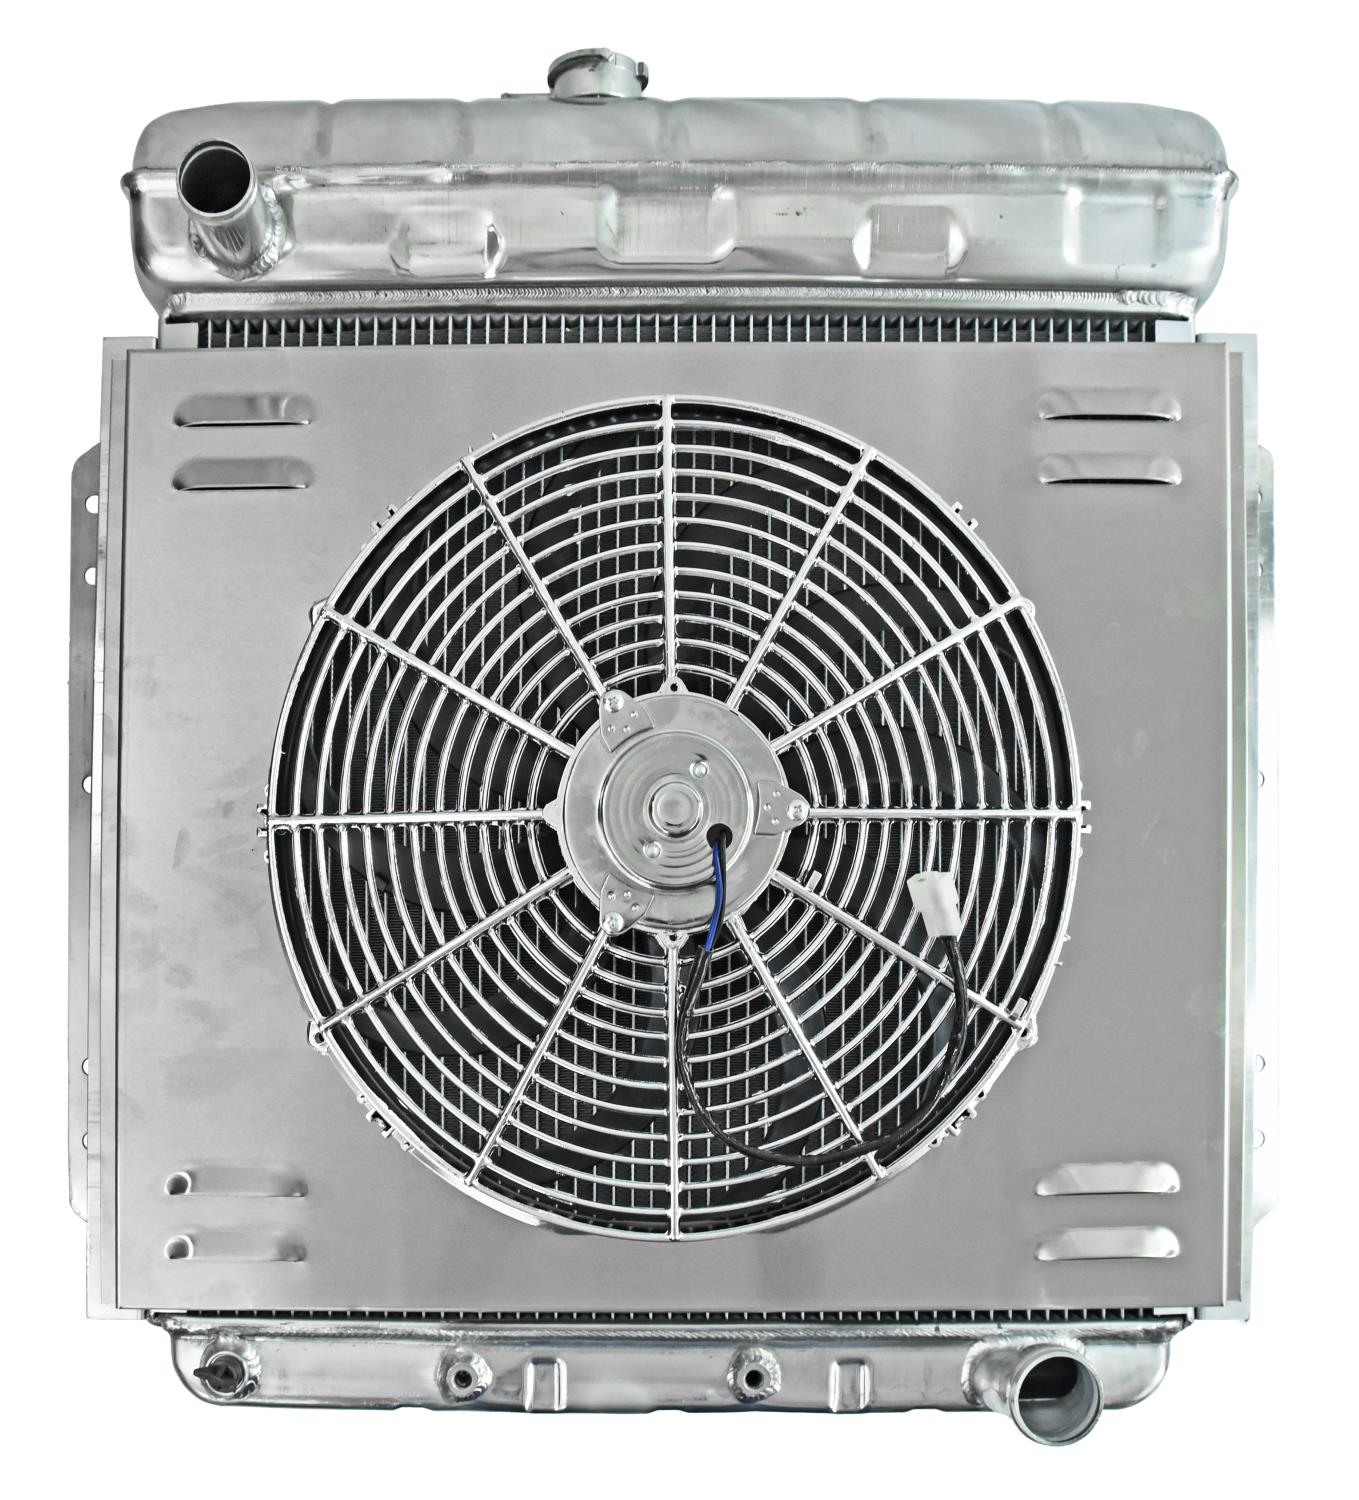 Aluminum Radiator & Fan Combo for 1953-1956 Ford Pickup w/Chevy V8 Engine Conversion [16 in. Fan]